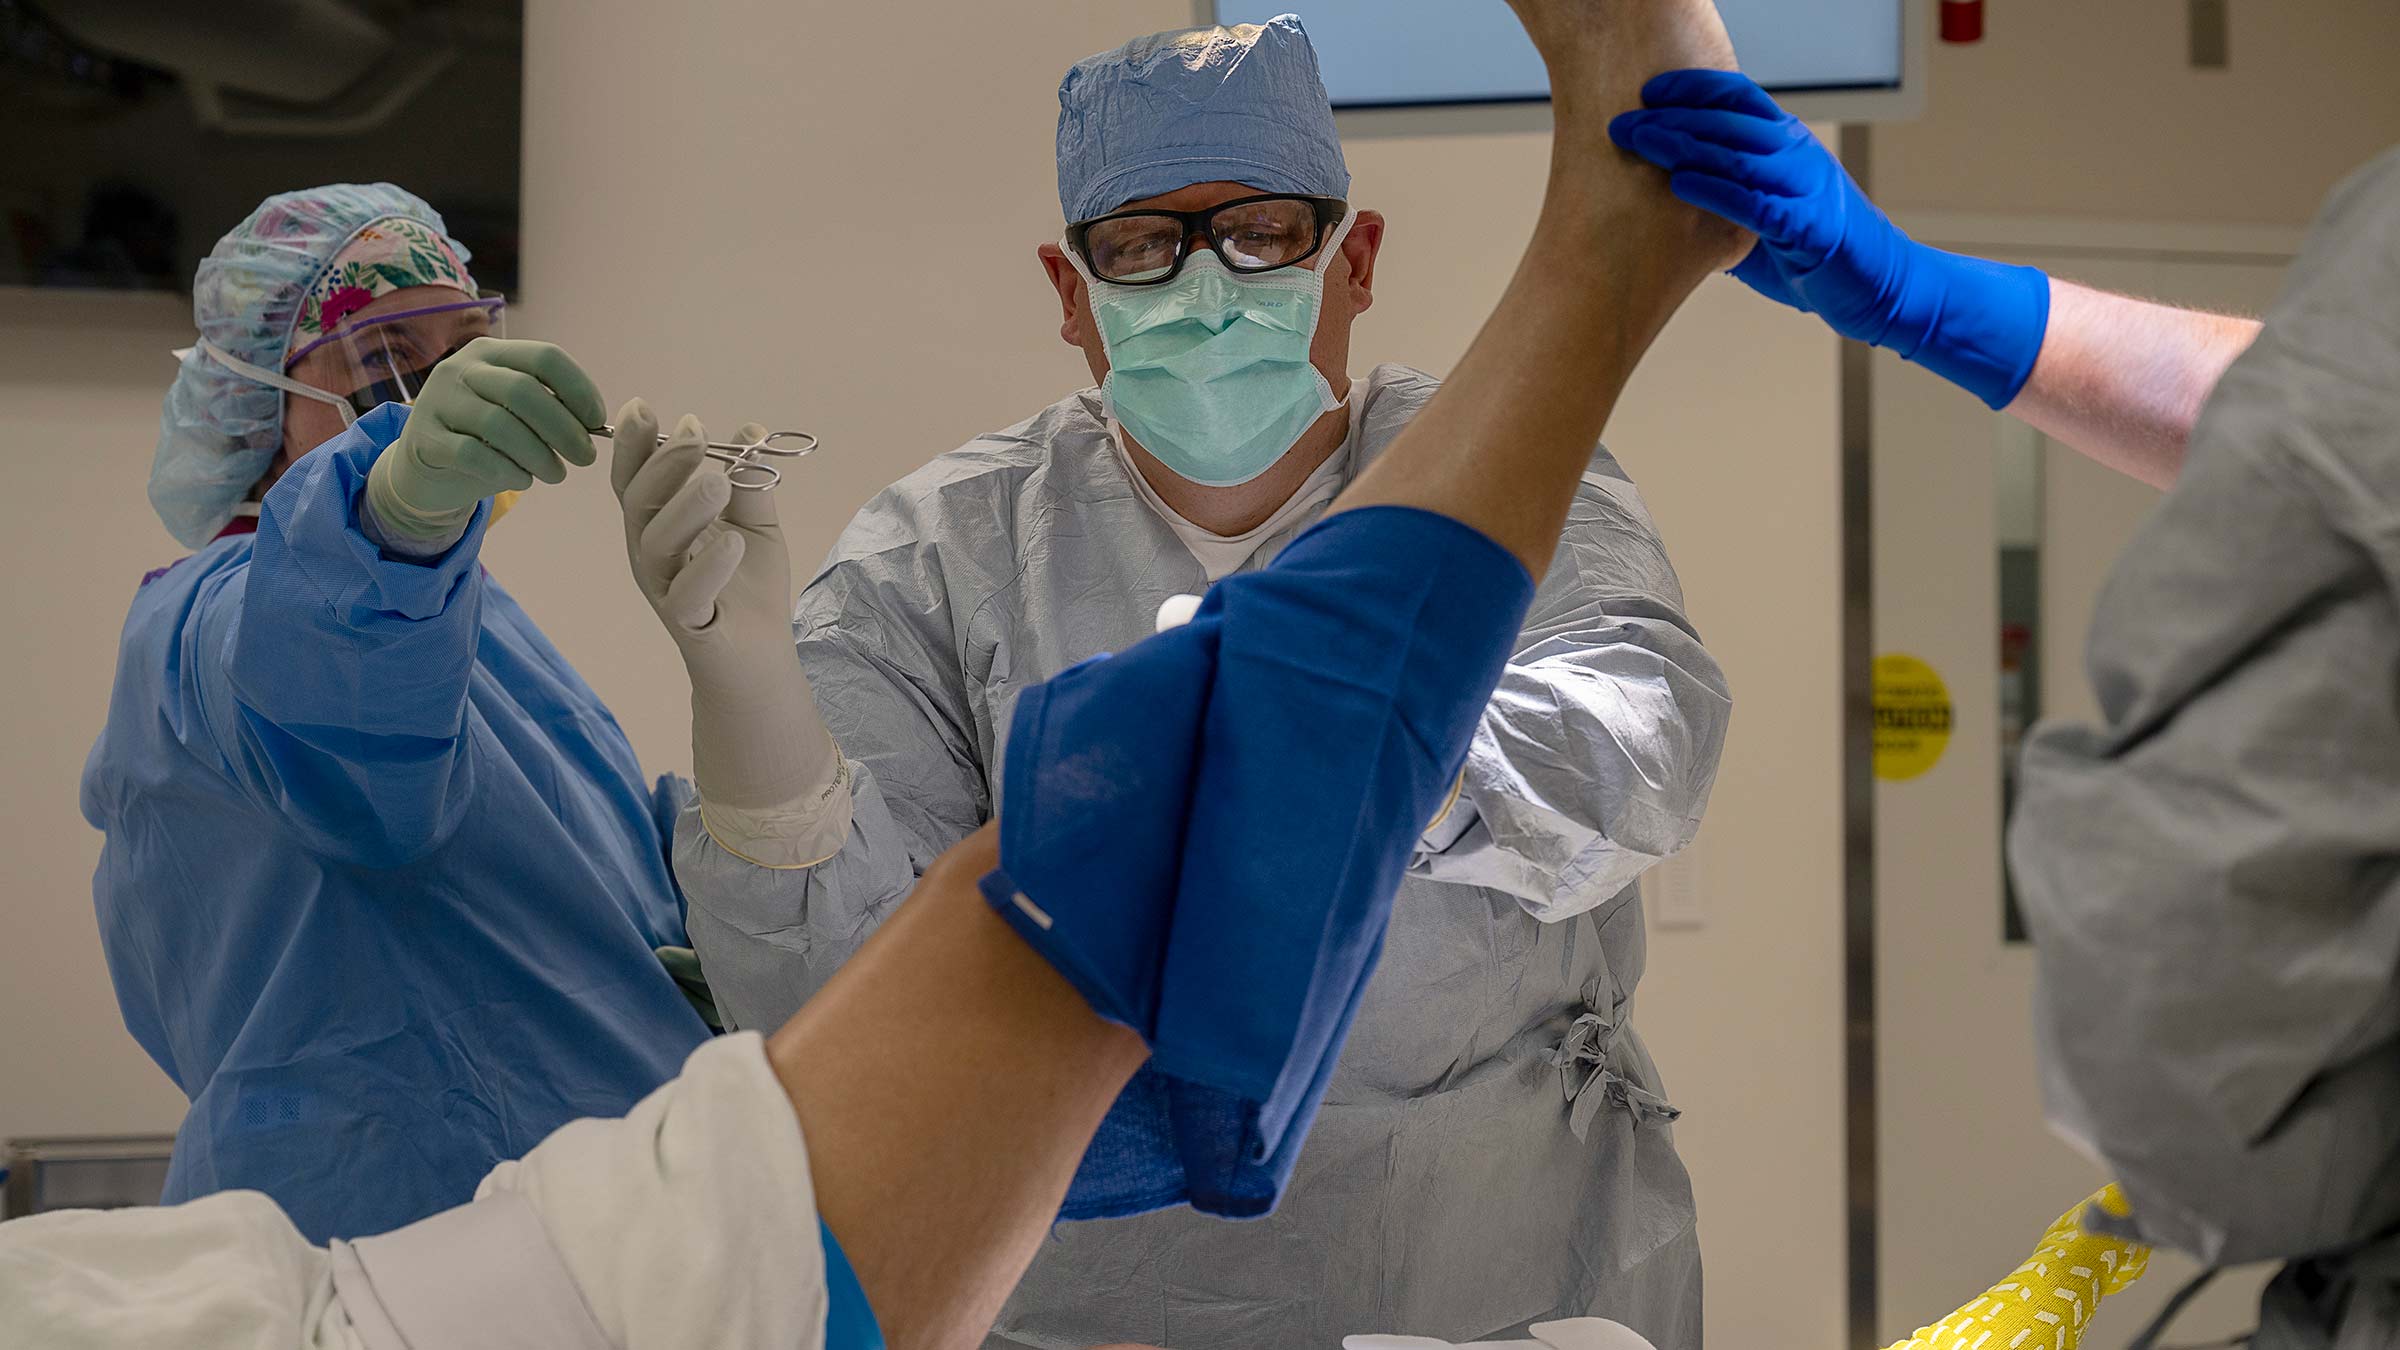 Dr. Joel Mayerson in an OR performing surgery on a leg